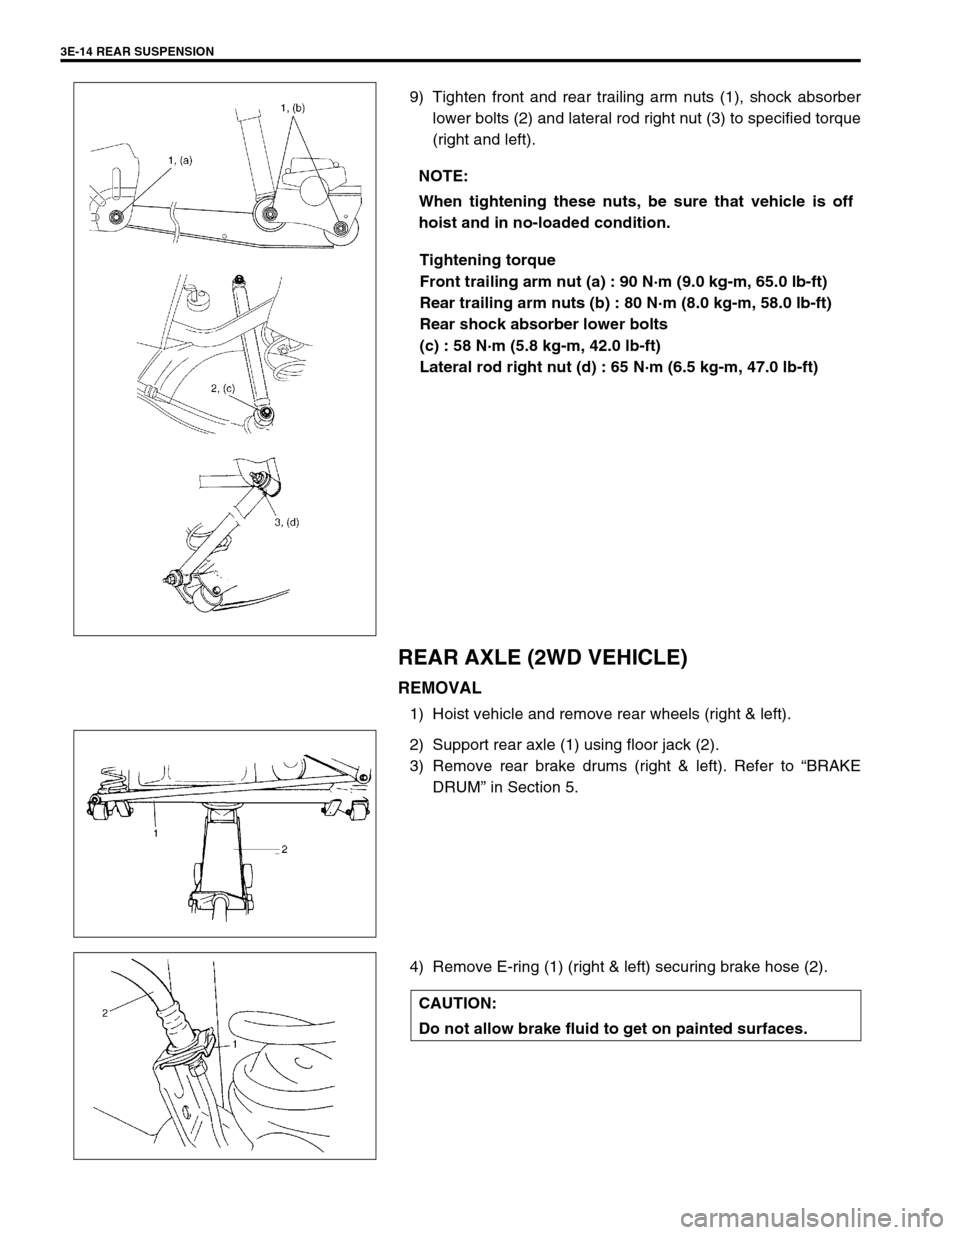 SUZUKI SWIFT 2000 1.G RG413 Service Workshop Manual 3E-14 REAR SUSPENSION
9) Tighten front and rear trailing arm nuts (1), shock absorber
lower bolts (2) and lateral rod right nut (3) to specified torque
(right and left).
Tightening torque
Front traili